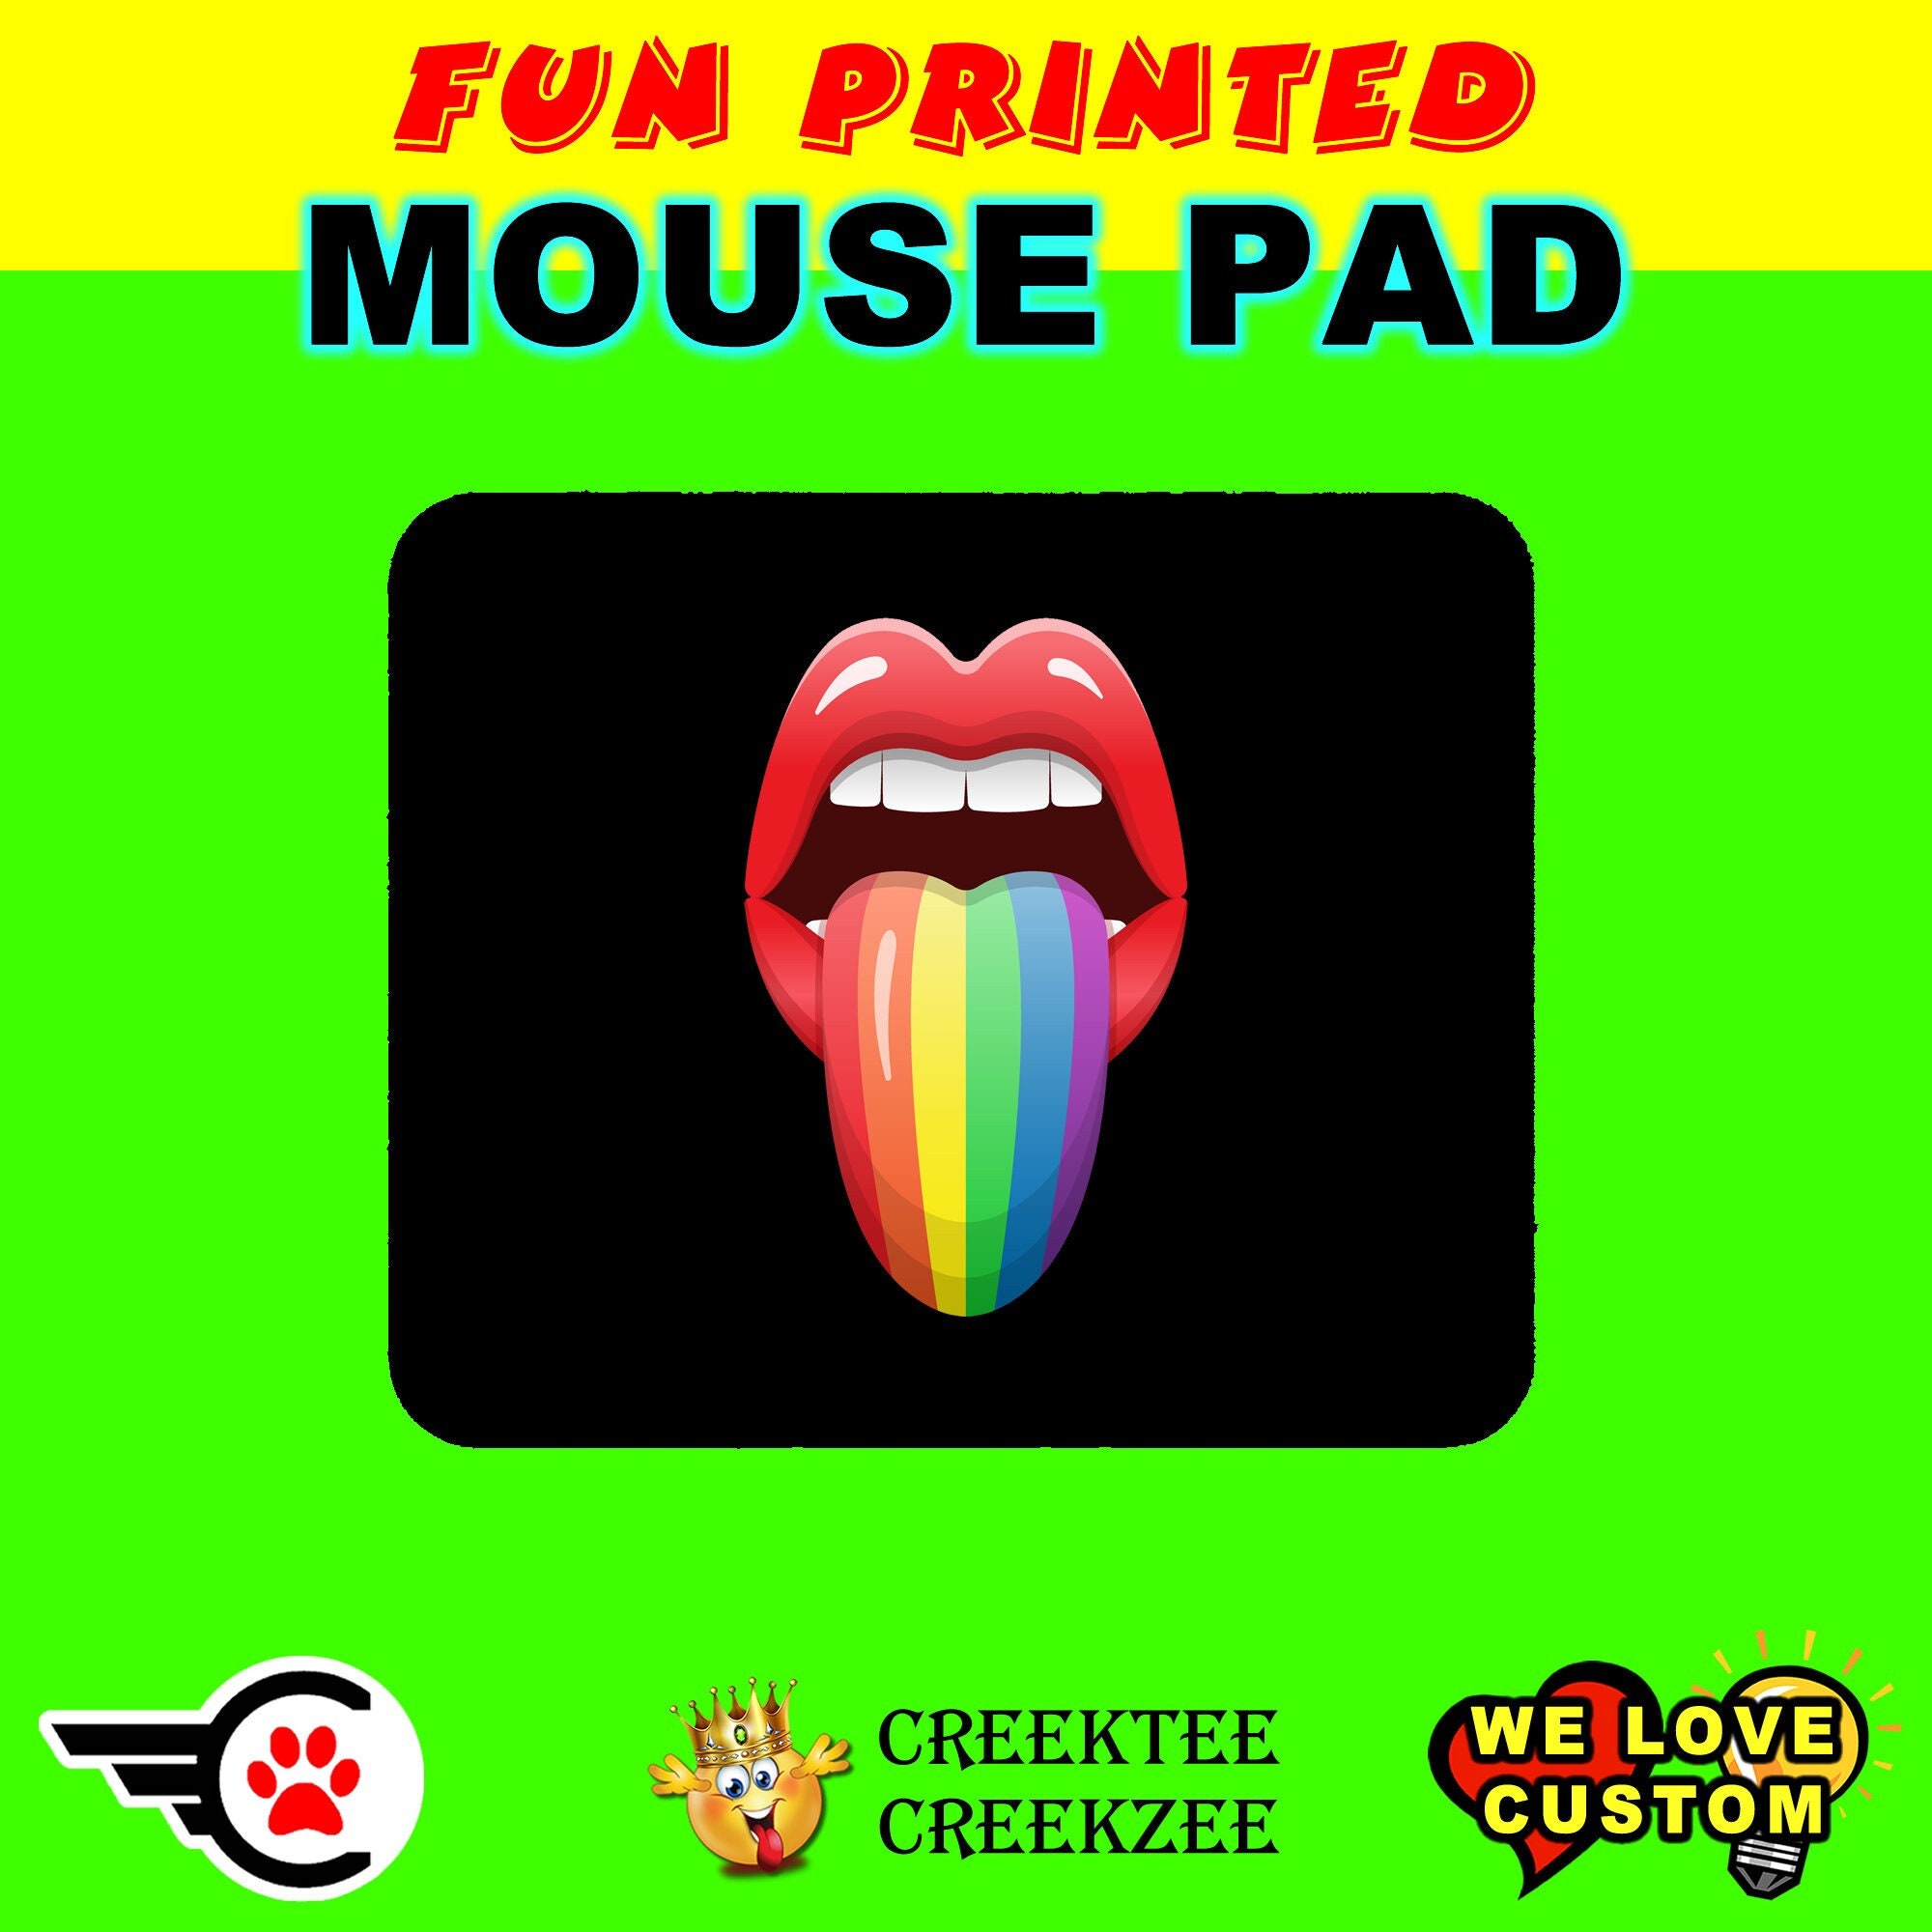 Pride Rainbow Tongue Black Background Printed Custom Mouse Pad - Mouse Pad Thick Non Slip Bottom Smooth or with your custom image or design